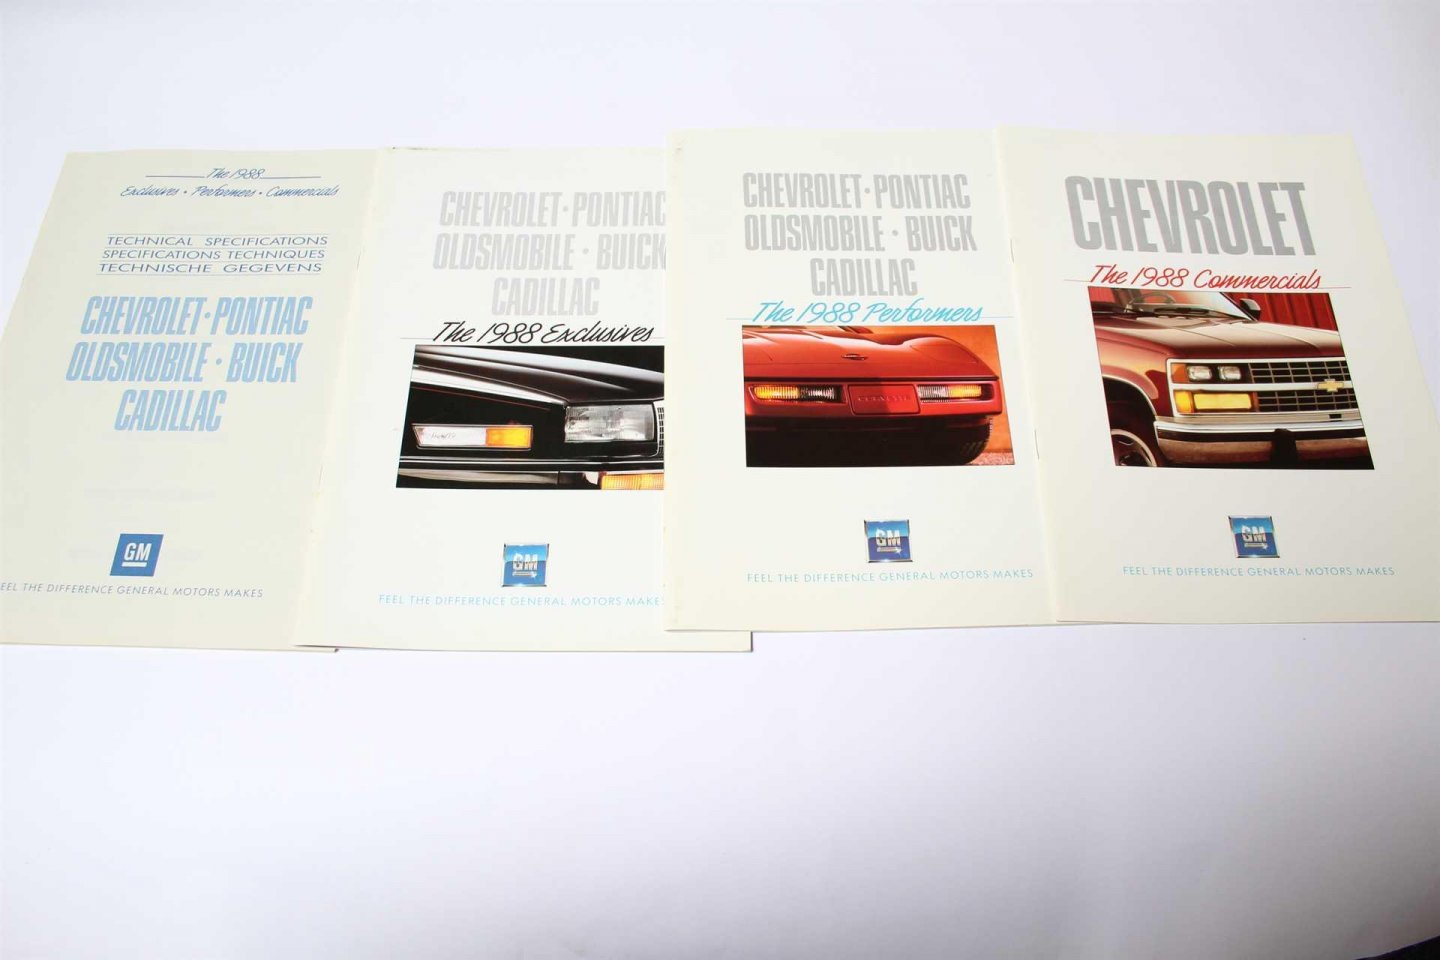  - The 1988 GM Detroit Collection